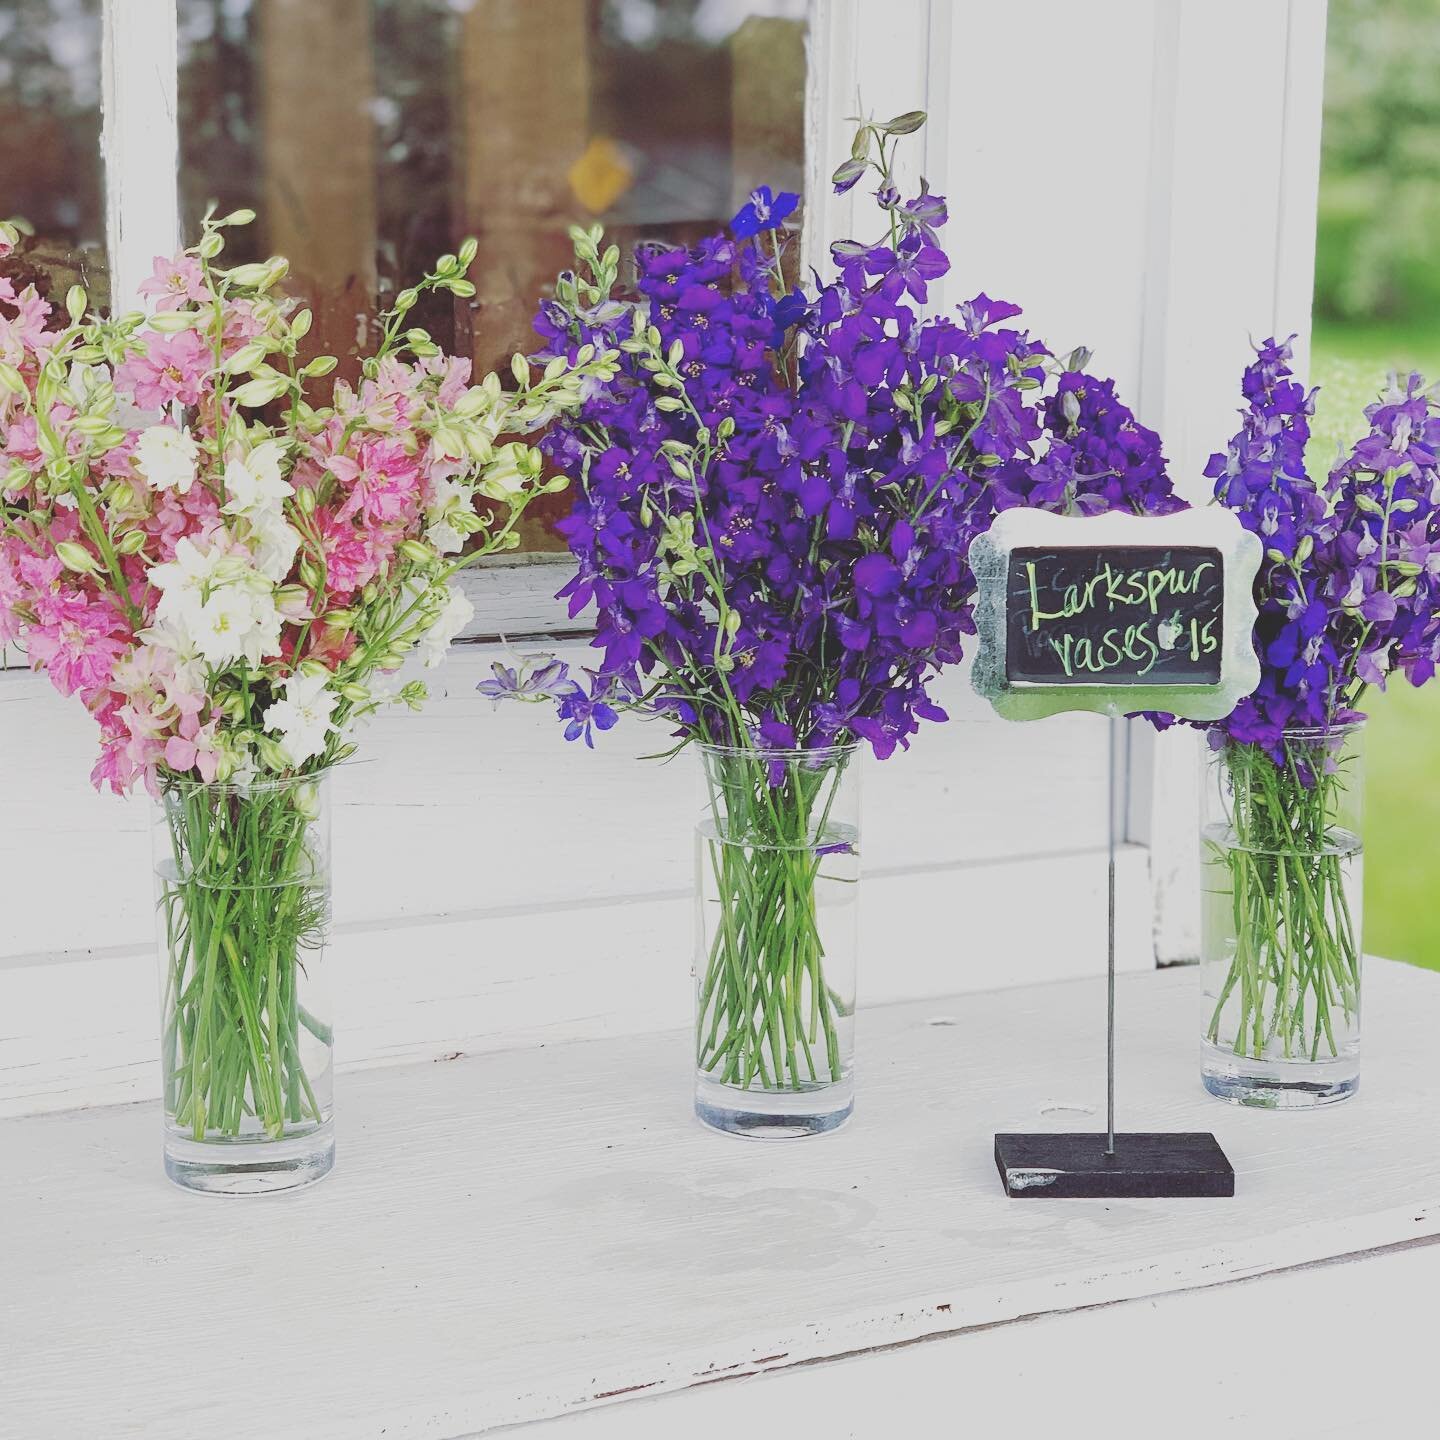 The flower coop at the farm on Route 2 is open! Wednesday - Saturday, 10-dusk or until sold out. Larkspur vases, Jars of Joy, and dried lavender bundles! 
.
.
.
.
.
#localflowersmakelifebetter #larkspur #flowerpower #organicfarm #lavender